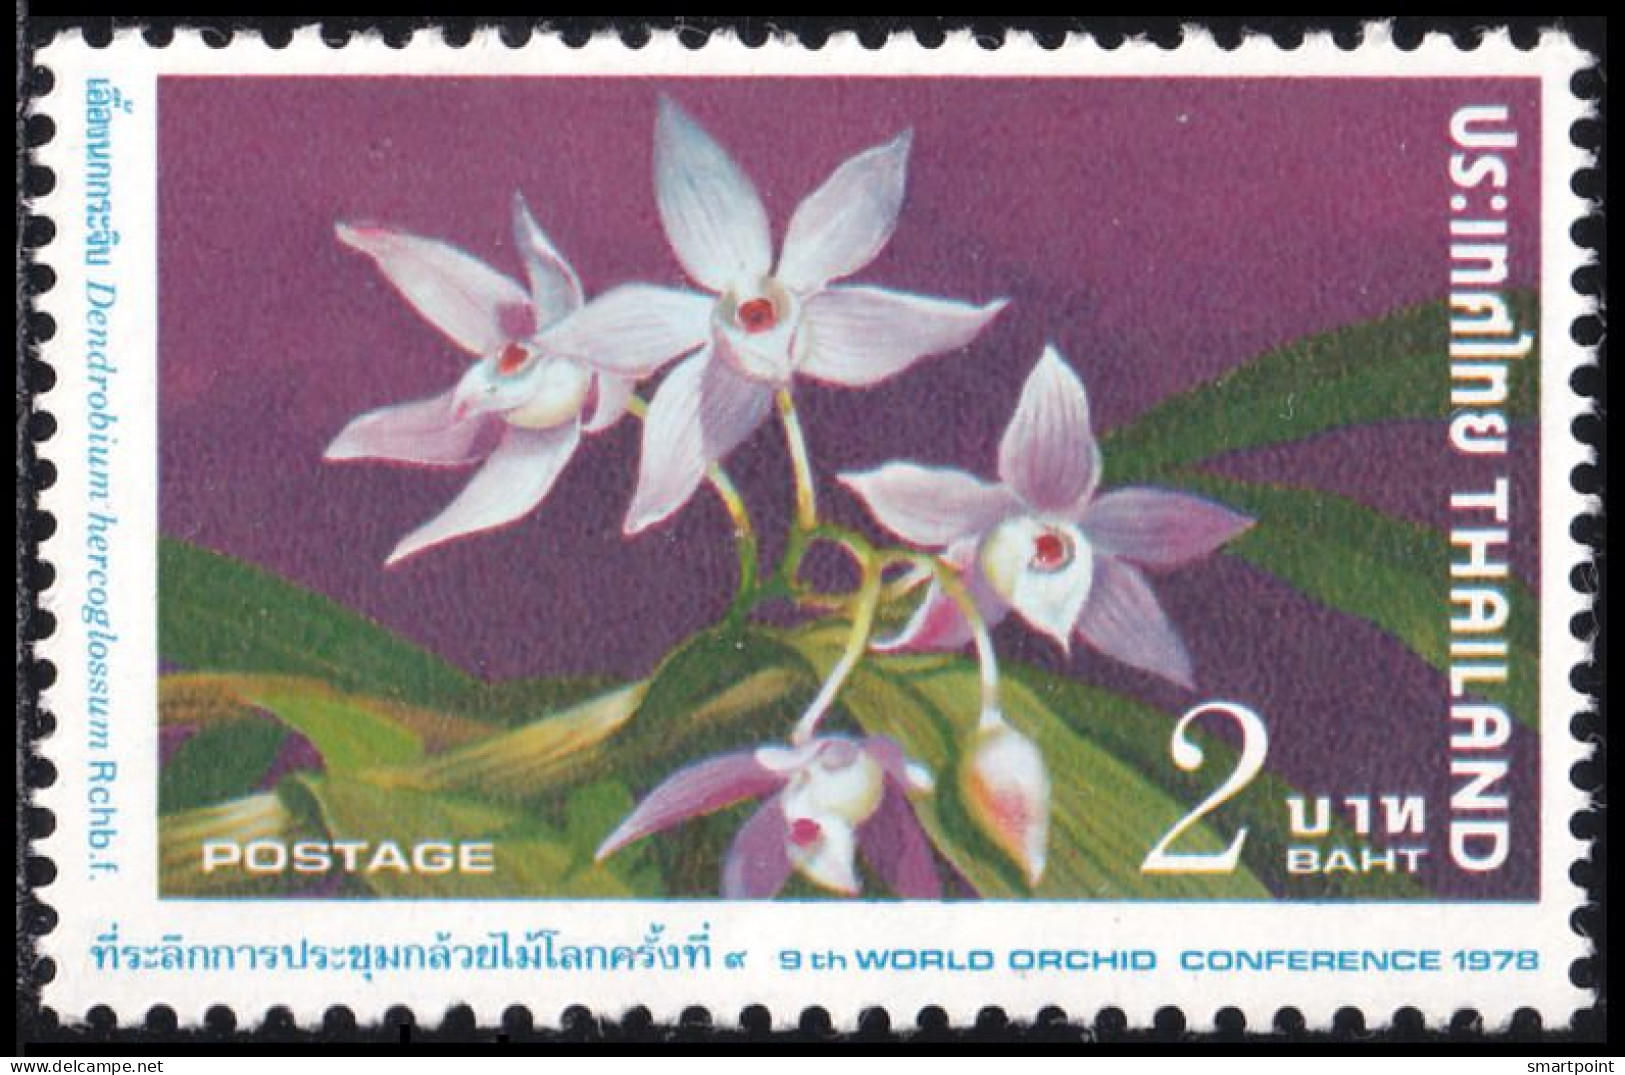 Thailand Stamp 1978 9th World Orchid Conference 2 Baht - Unused - Thailand